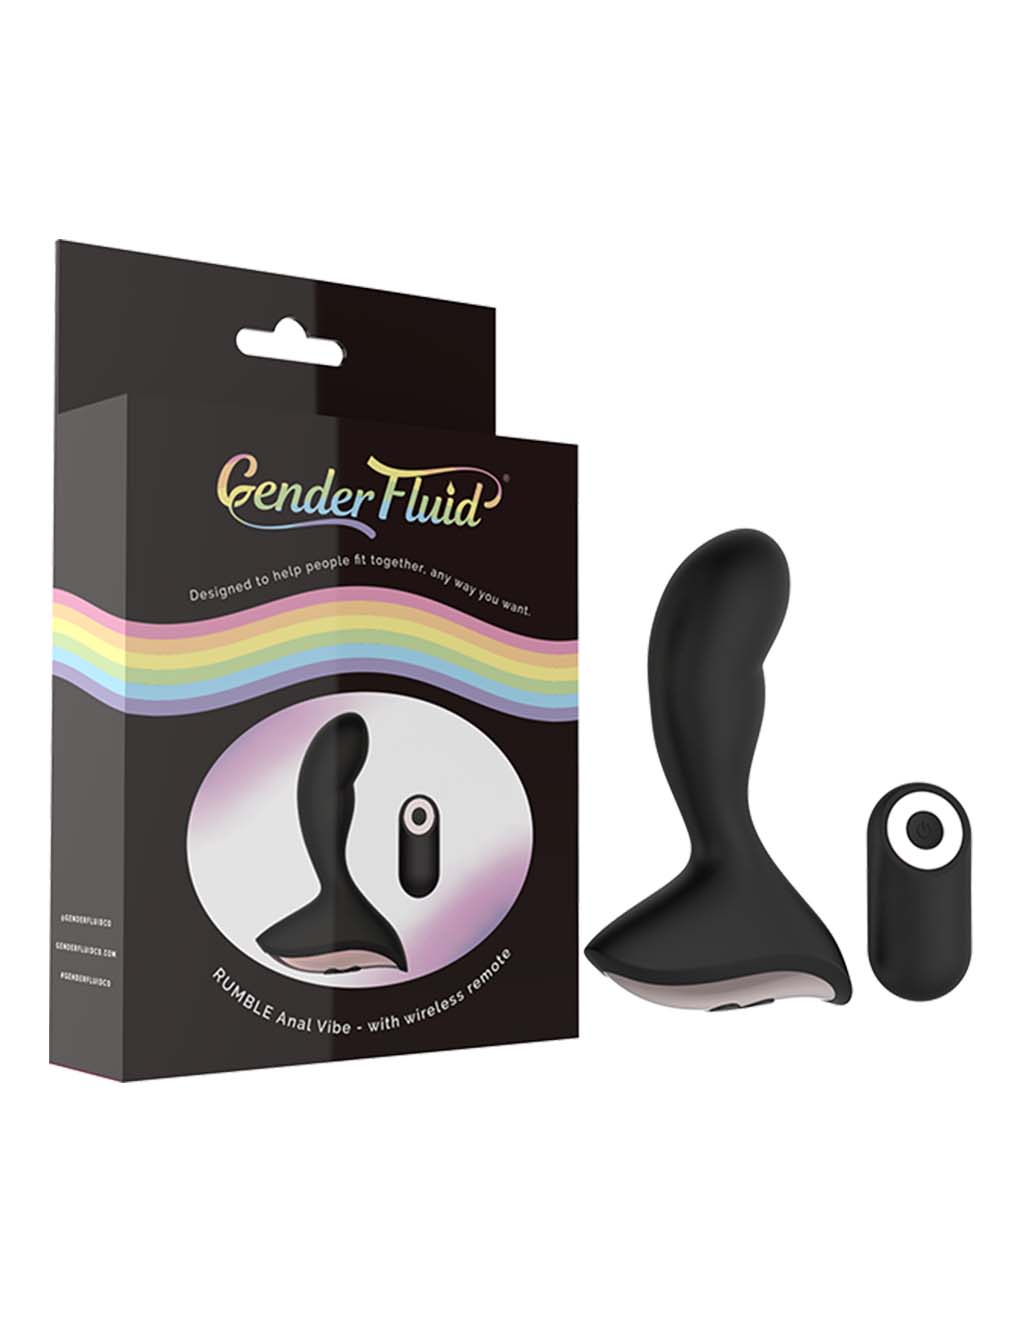 Gender Fluid Rumble Anal Vibe - Toy with Box